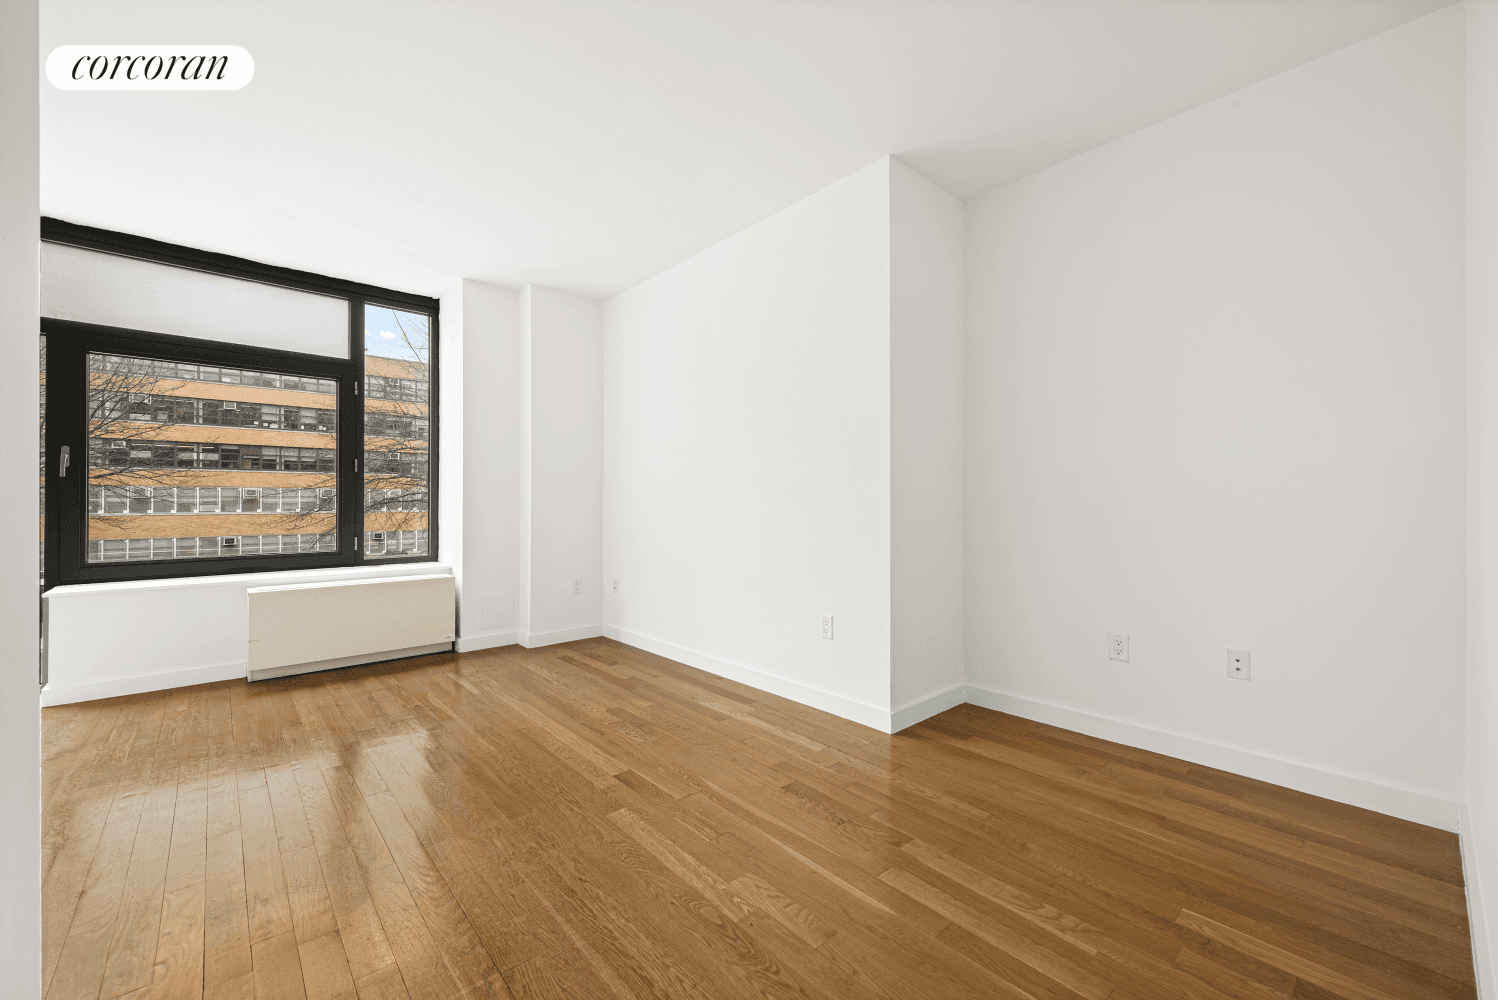 Make this studio apartment in the heart of Williamsburg your home !